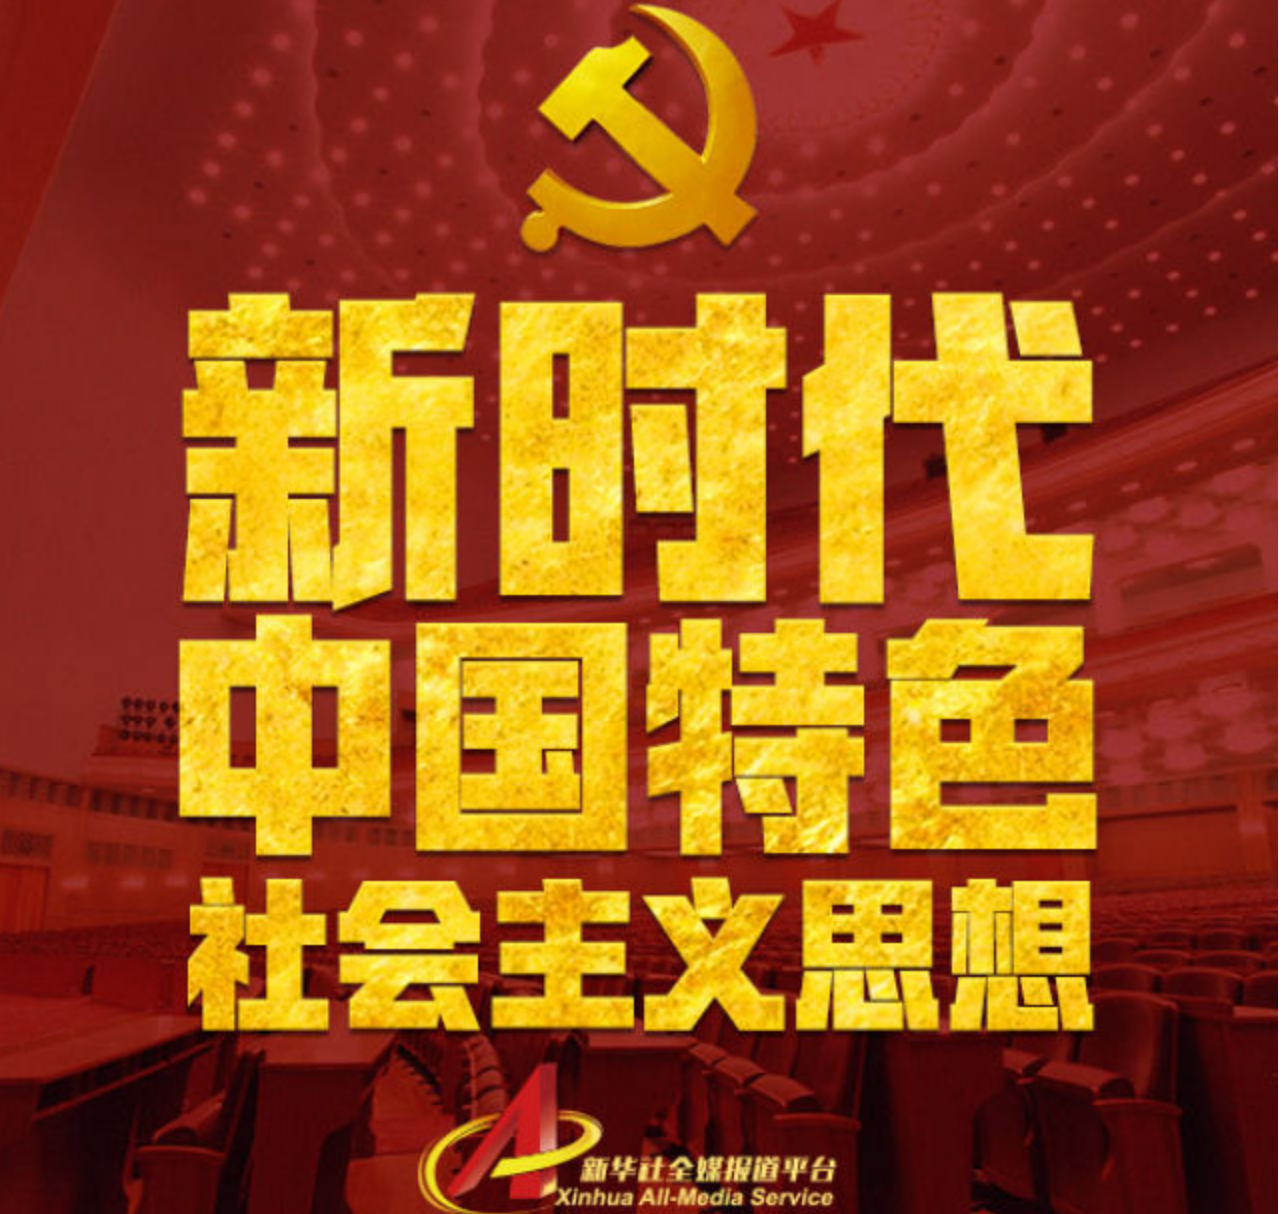 Law At The End Of The Day 新时代中国特色社会主义思想 Socialism With Chinese Characteristics In The New Era English Language Simulcast Of The Report Delivered By Xi Jinping During The 19th Chinese Communist Party